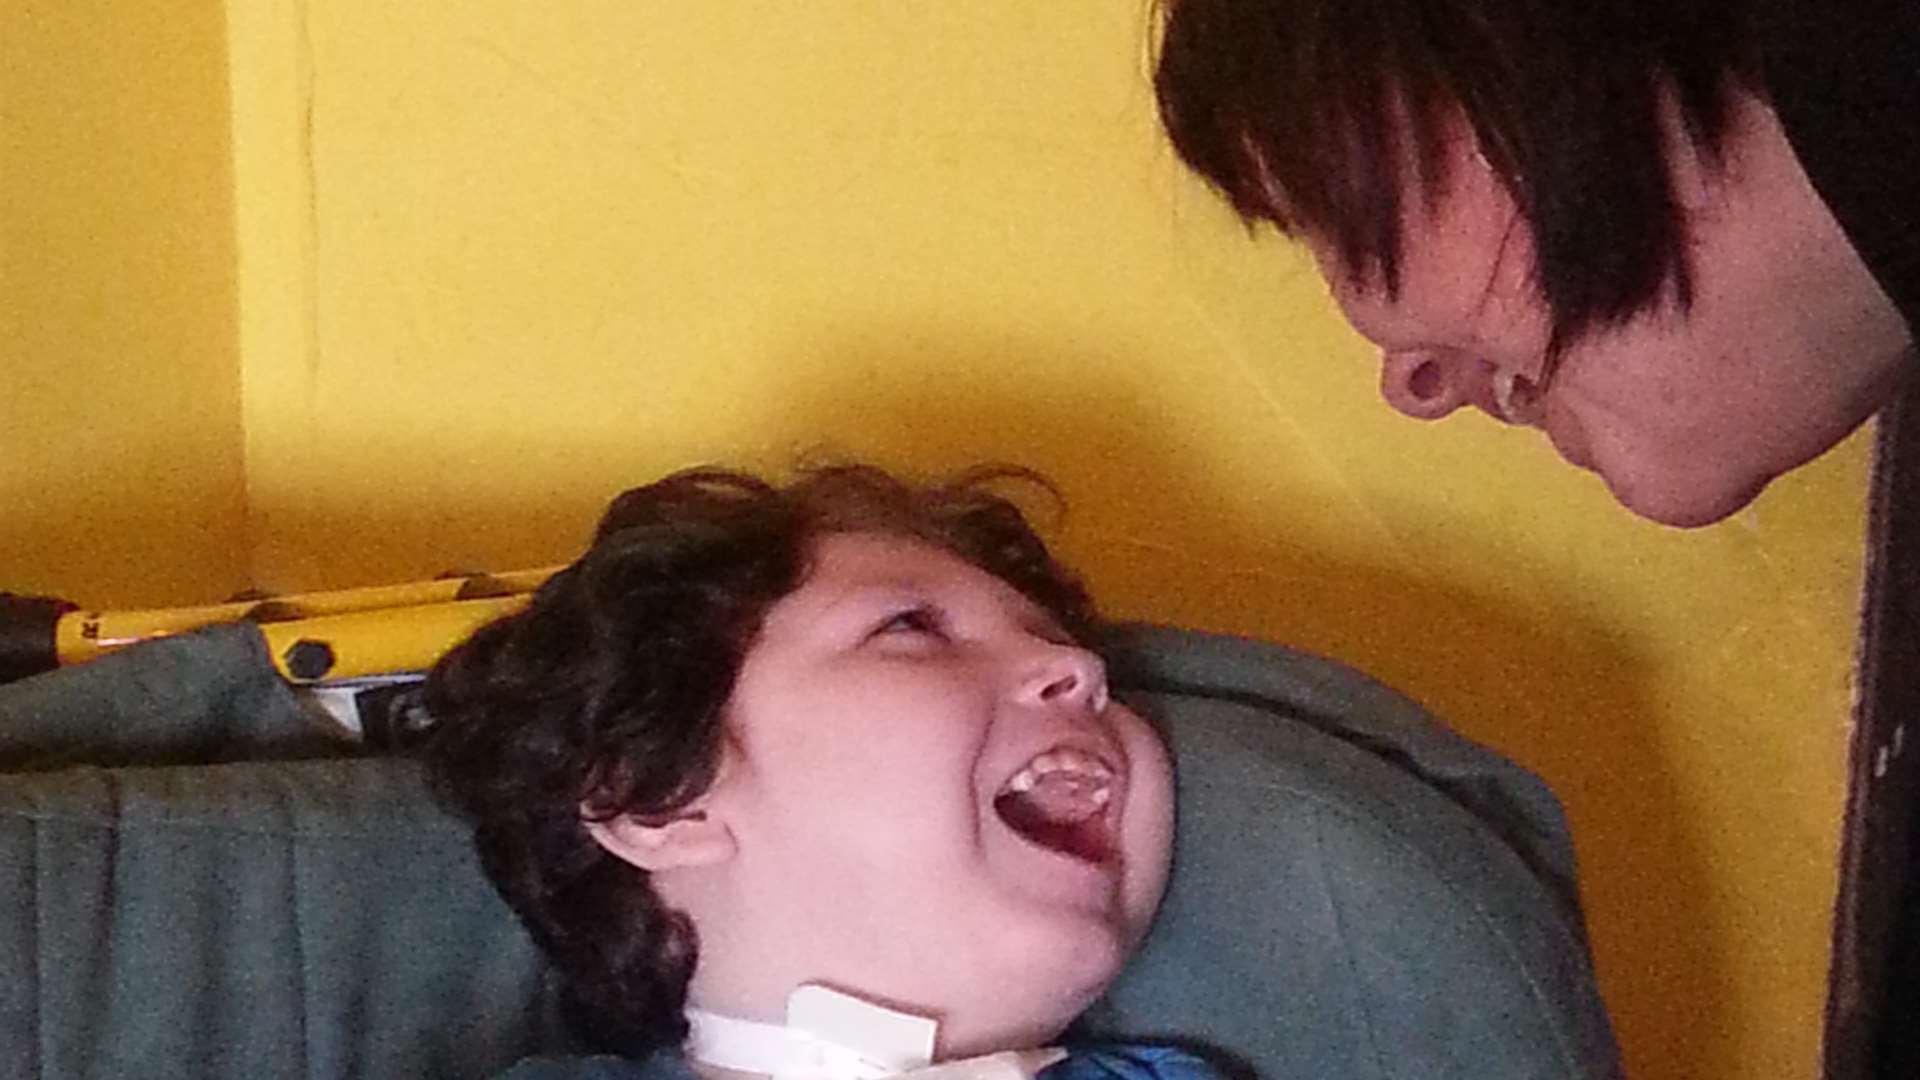 Terry was born with cerebal palsy and brain damage.